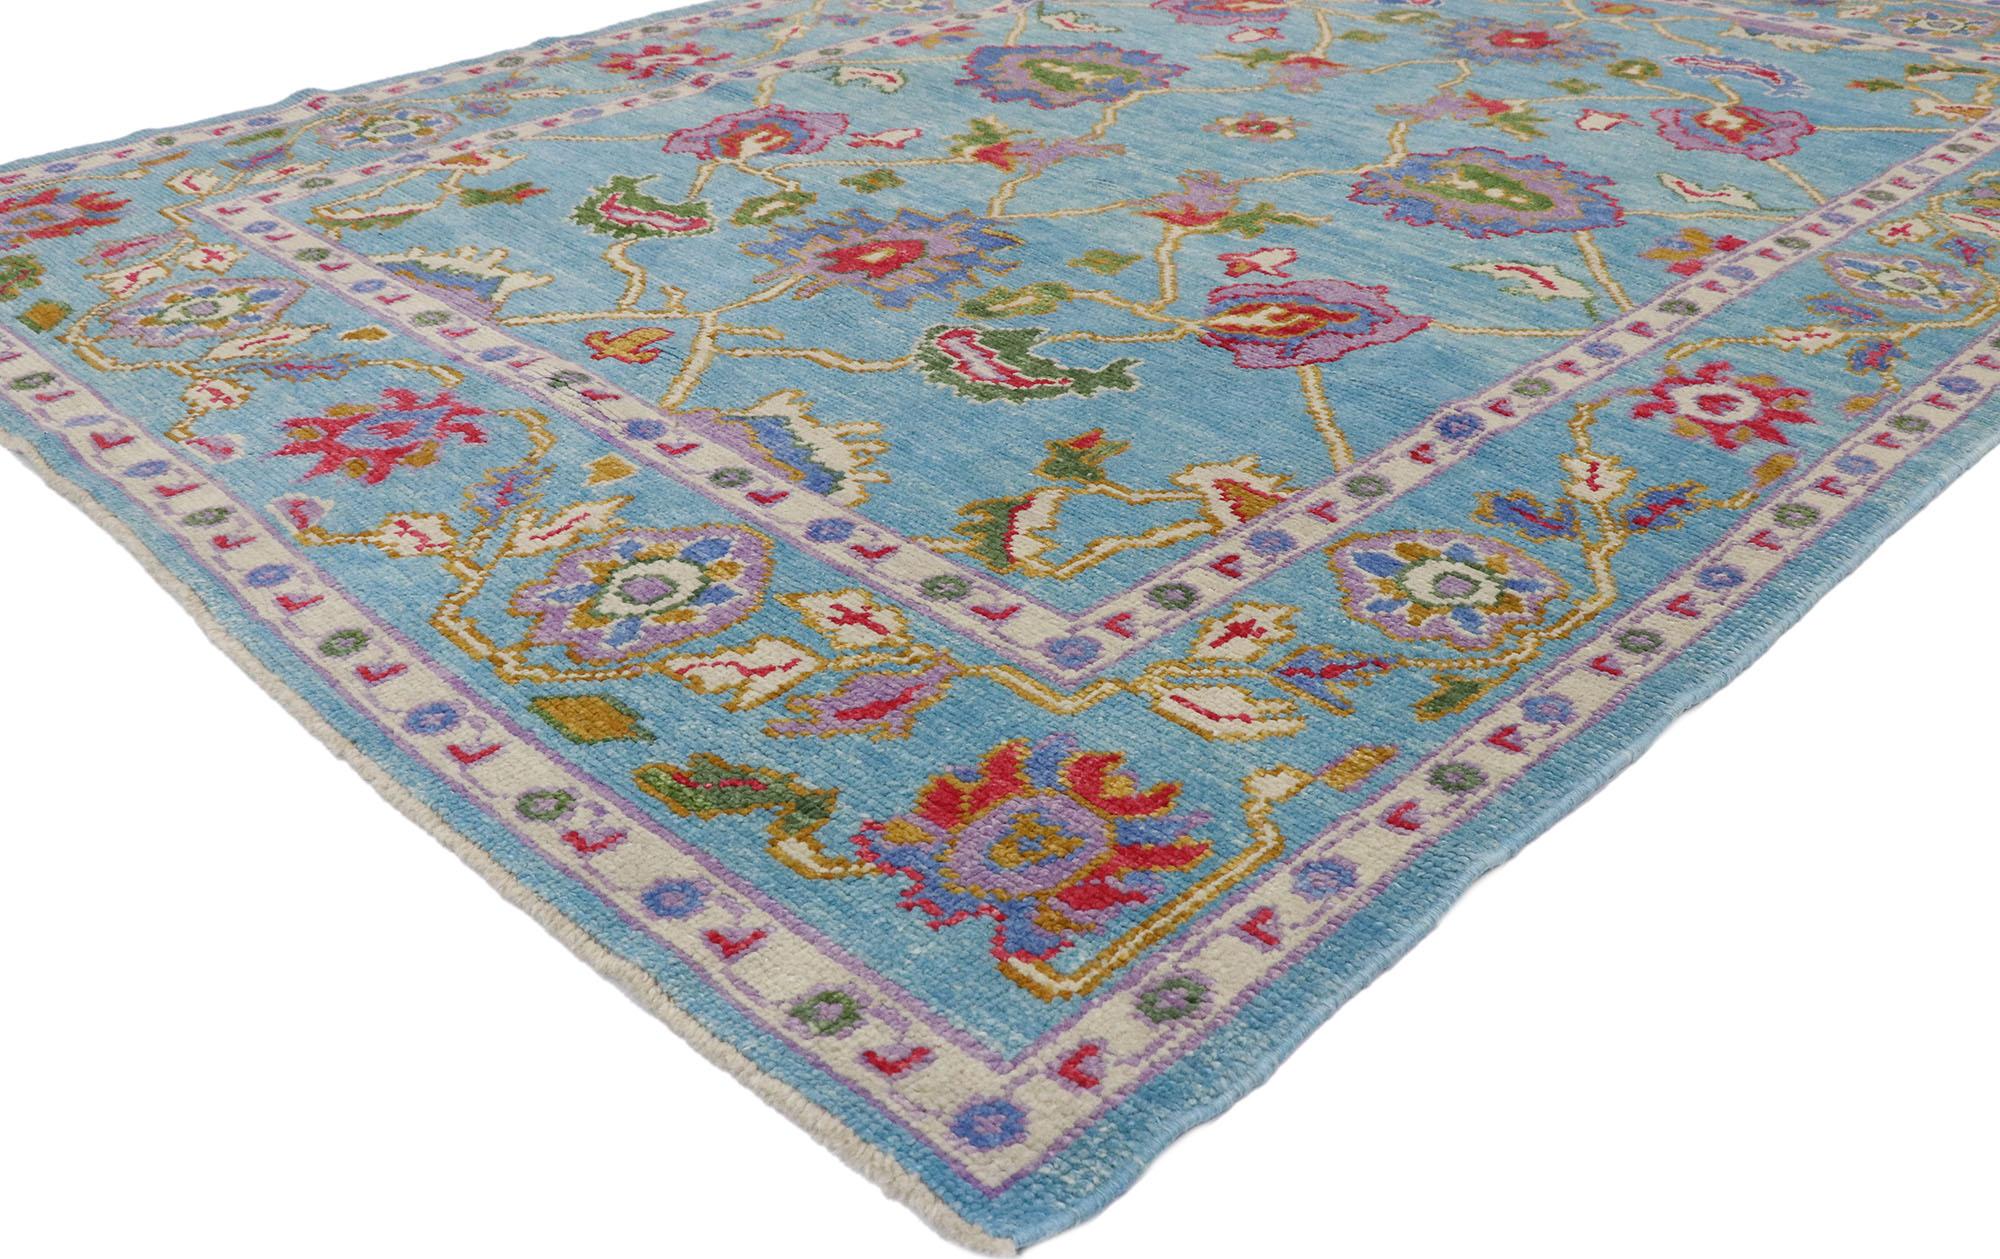 53462, new contemporary colorful Turkish Oushak rug with Eclectic Parisian style. Blending elements from the modern world with a vibrant color palette, this hand knotted wool contemporary Turkish Oushak rug is poised to impress. It features an